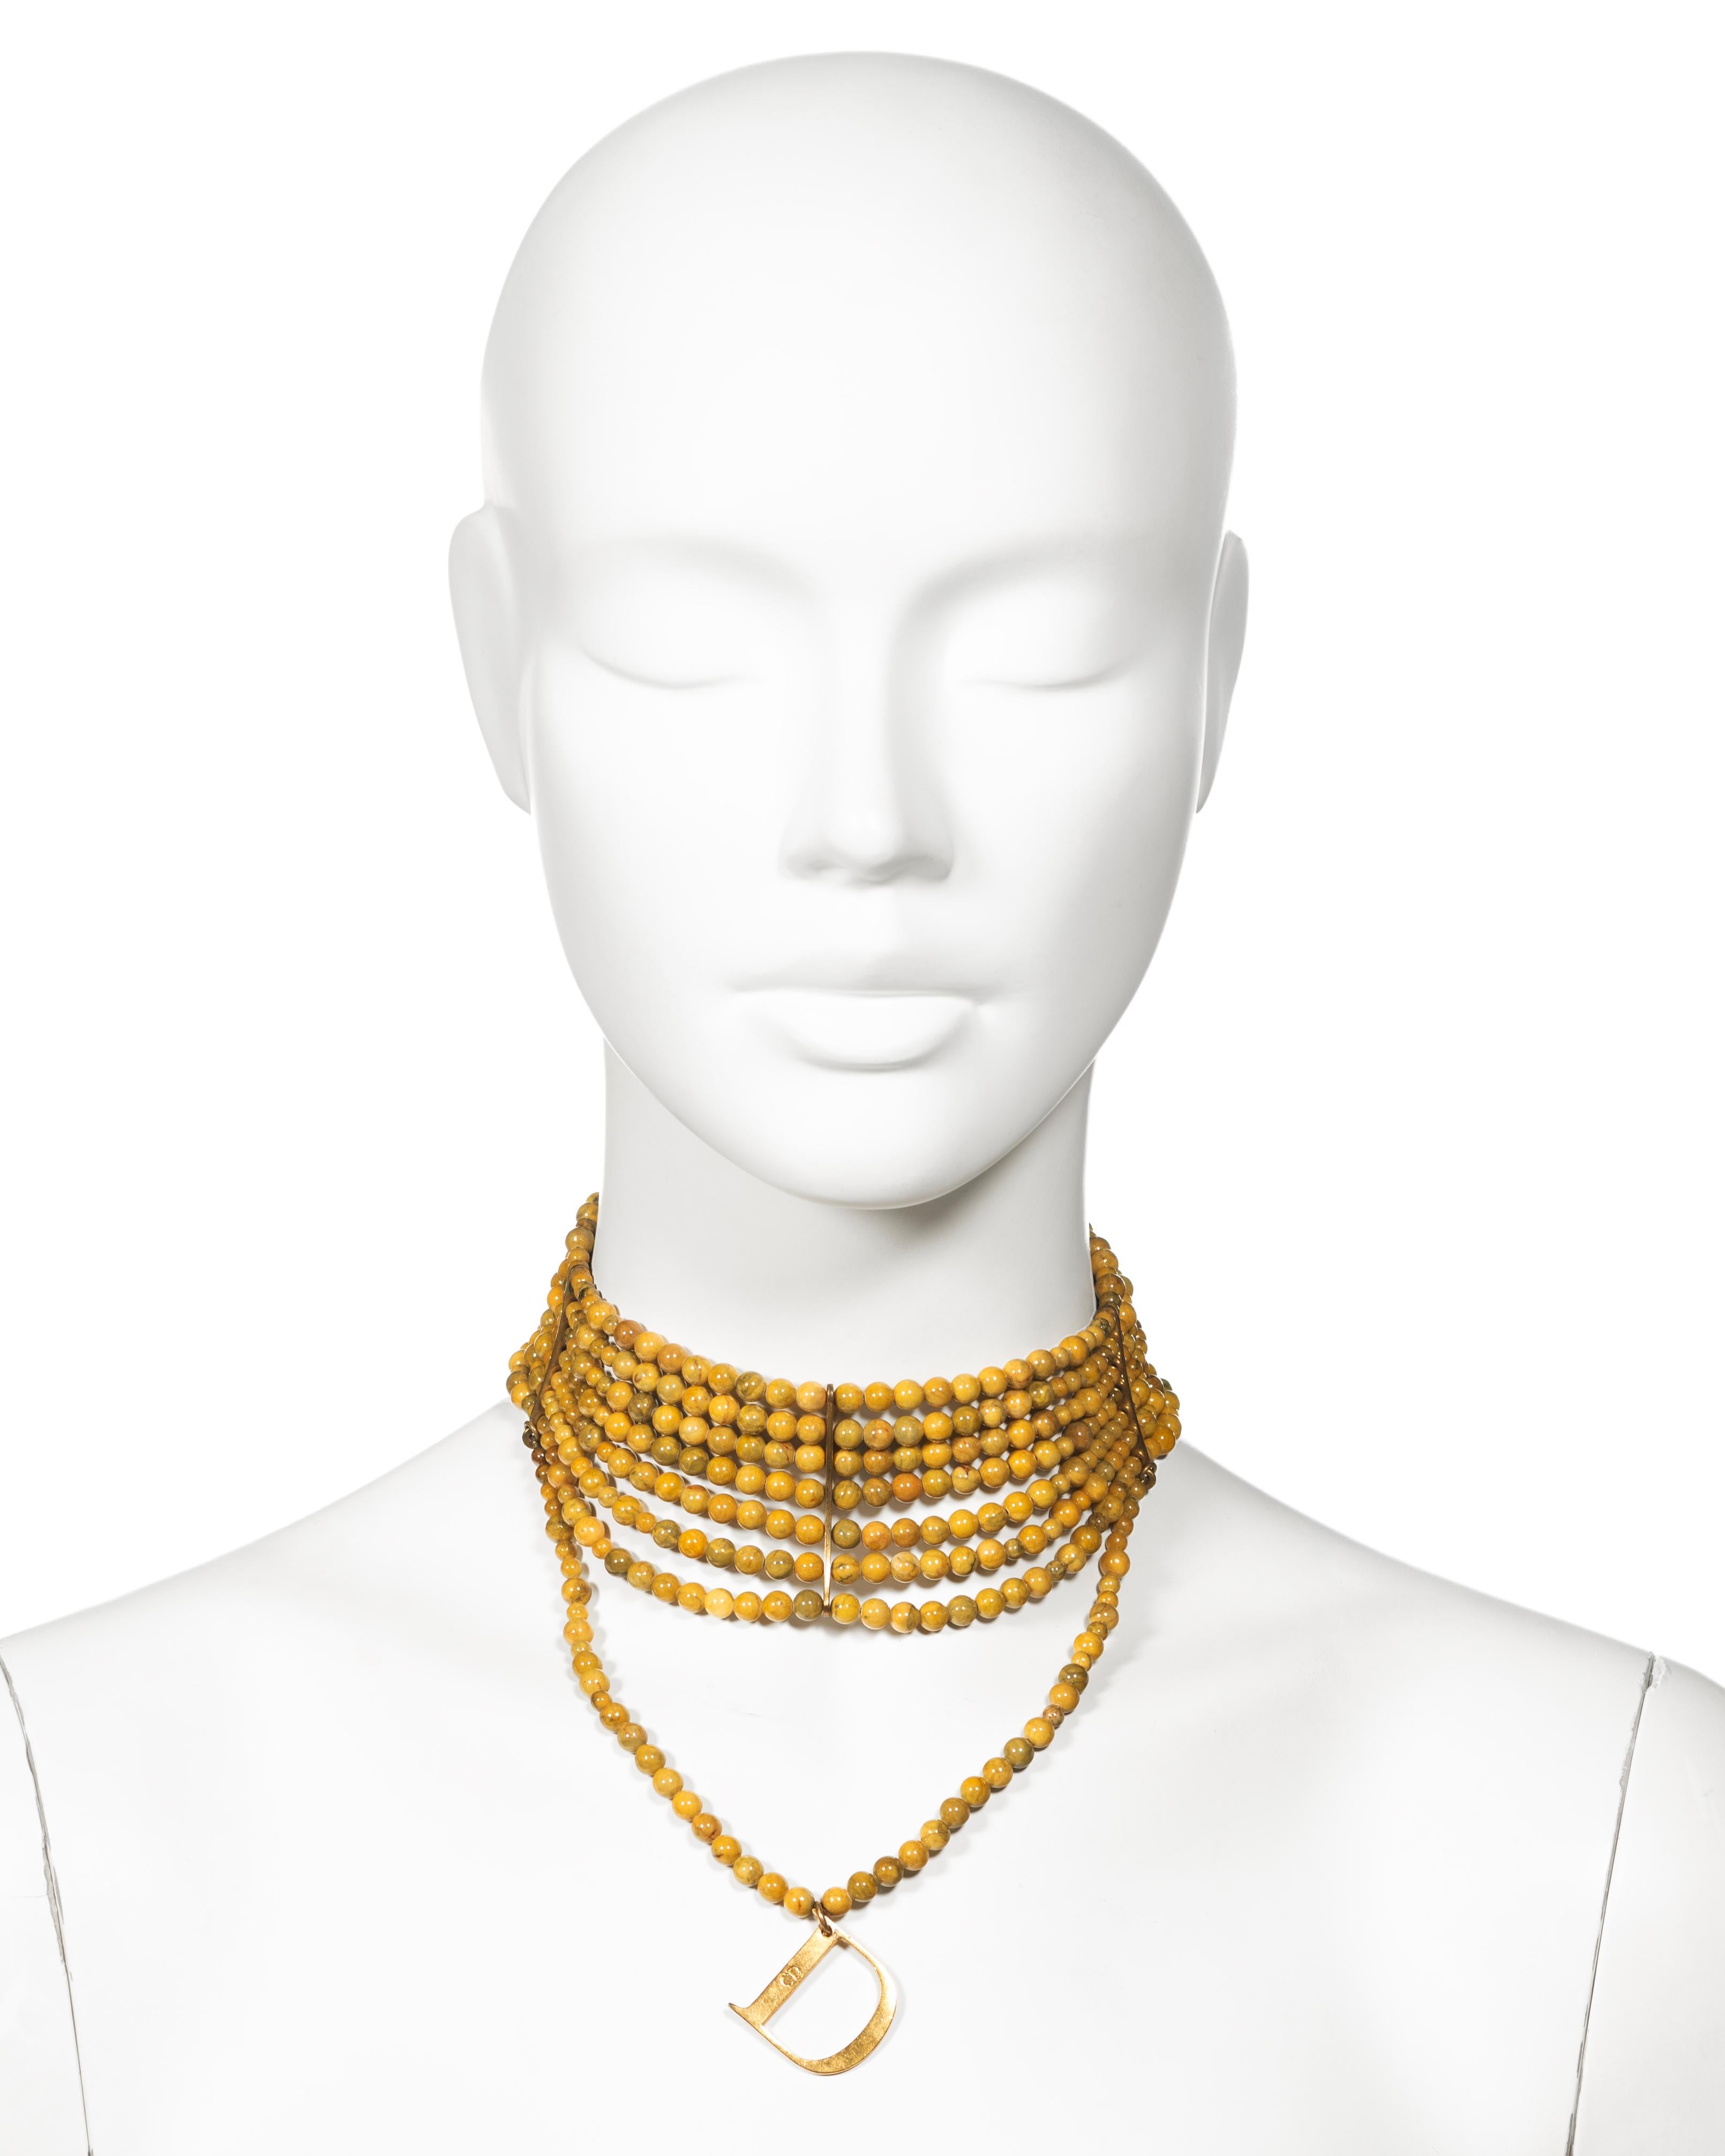 Women's Christian Dior by John Galliano Marbled Glass Bead Choker Necklace, c. 1998 For Sale